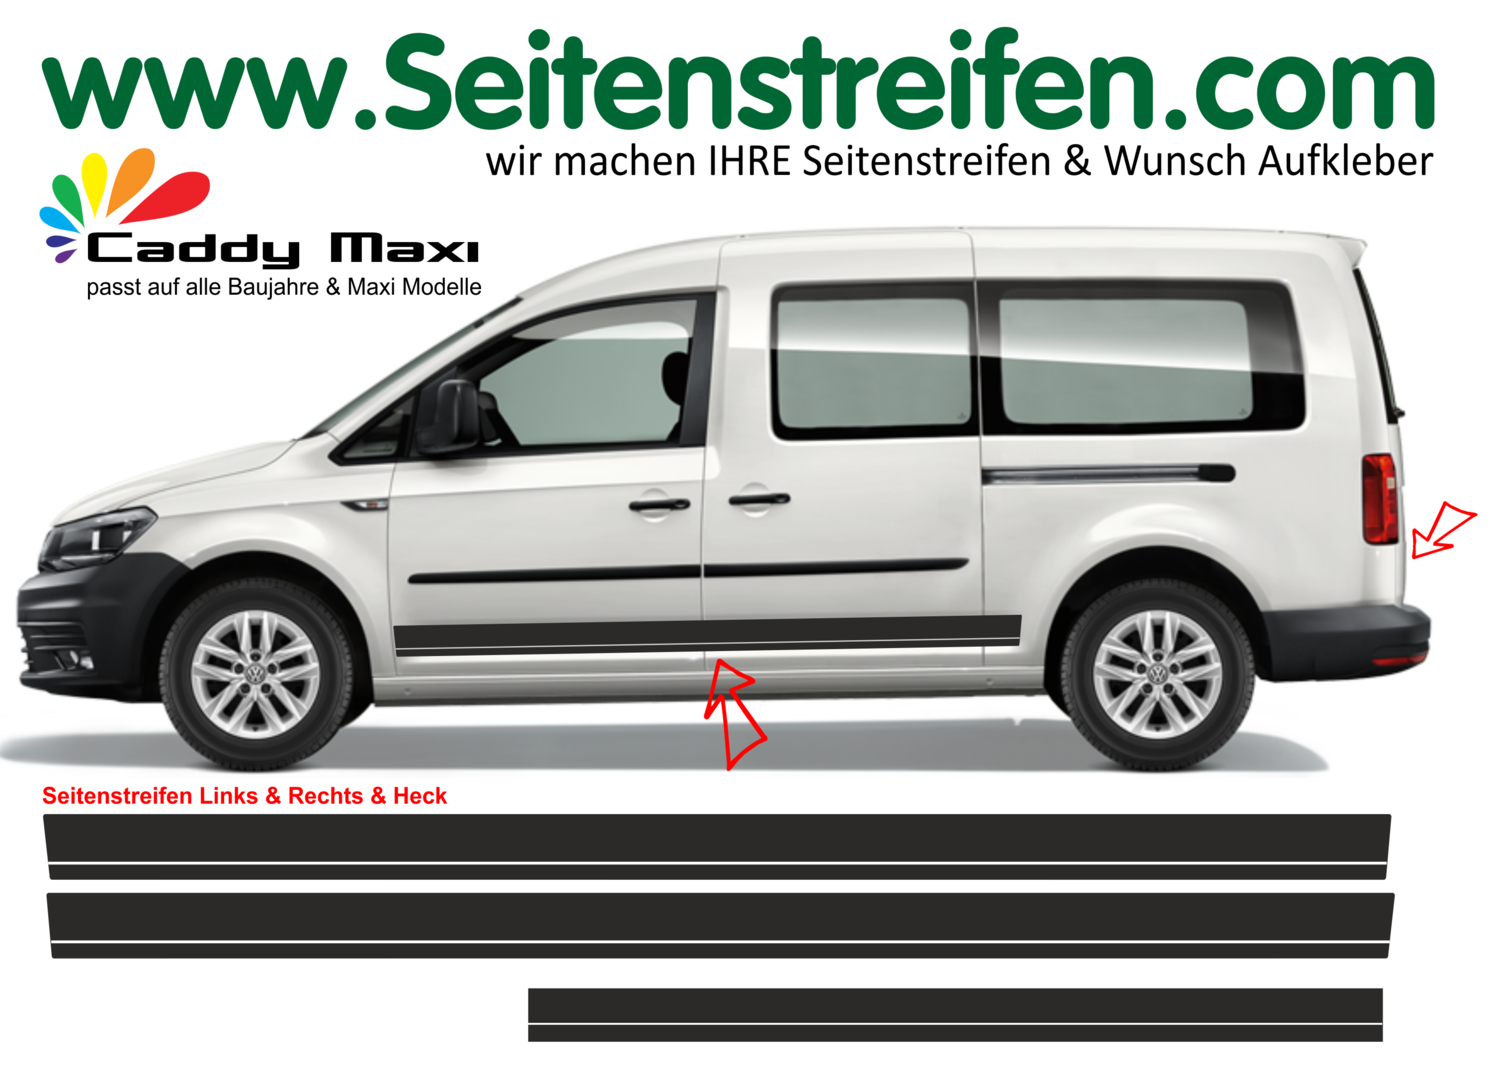 VW Caddy Maxi - Edition with Line Decor - Side Stripes Graphics Decals Sticker Kit - Nº 1075